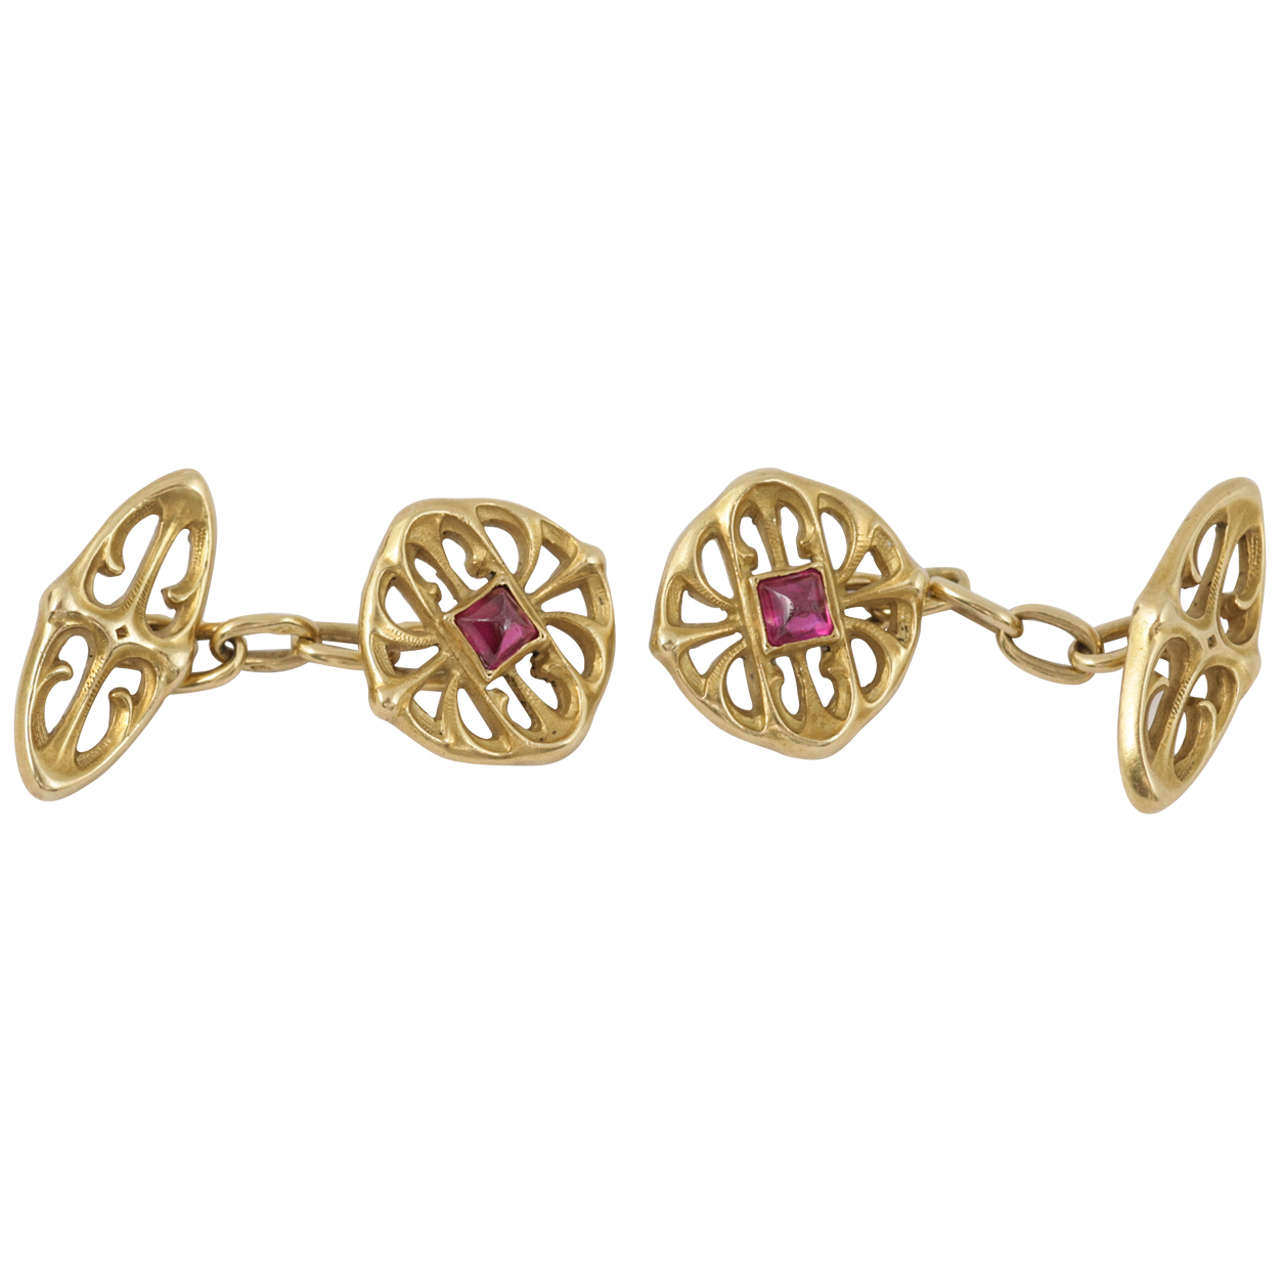 French Art Nouveau Cabouchon Ruby and Gold cufflinks